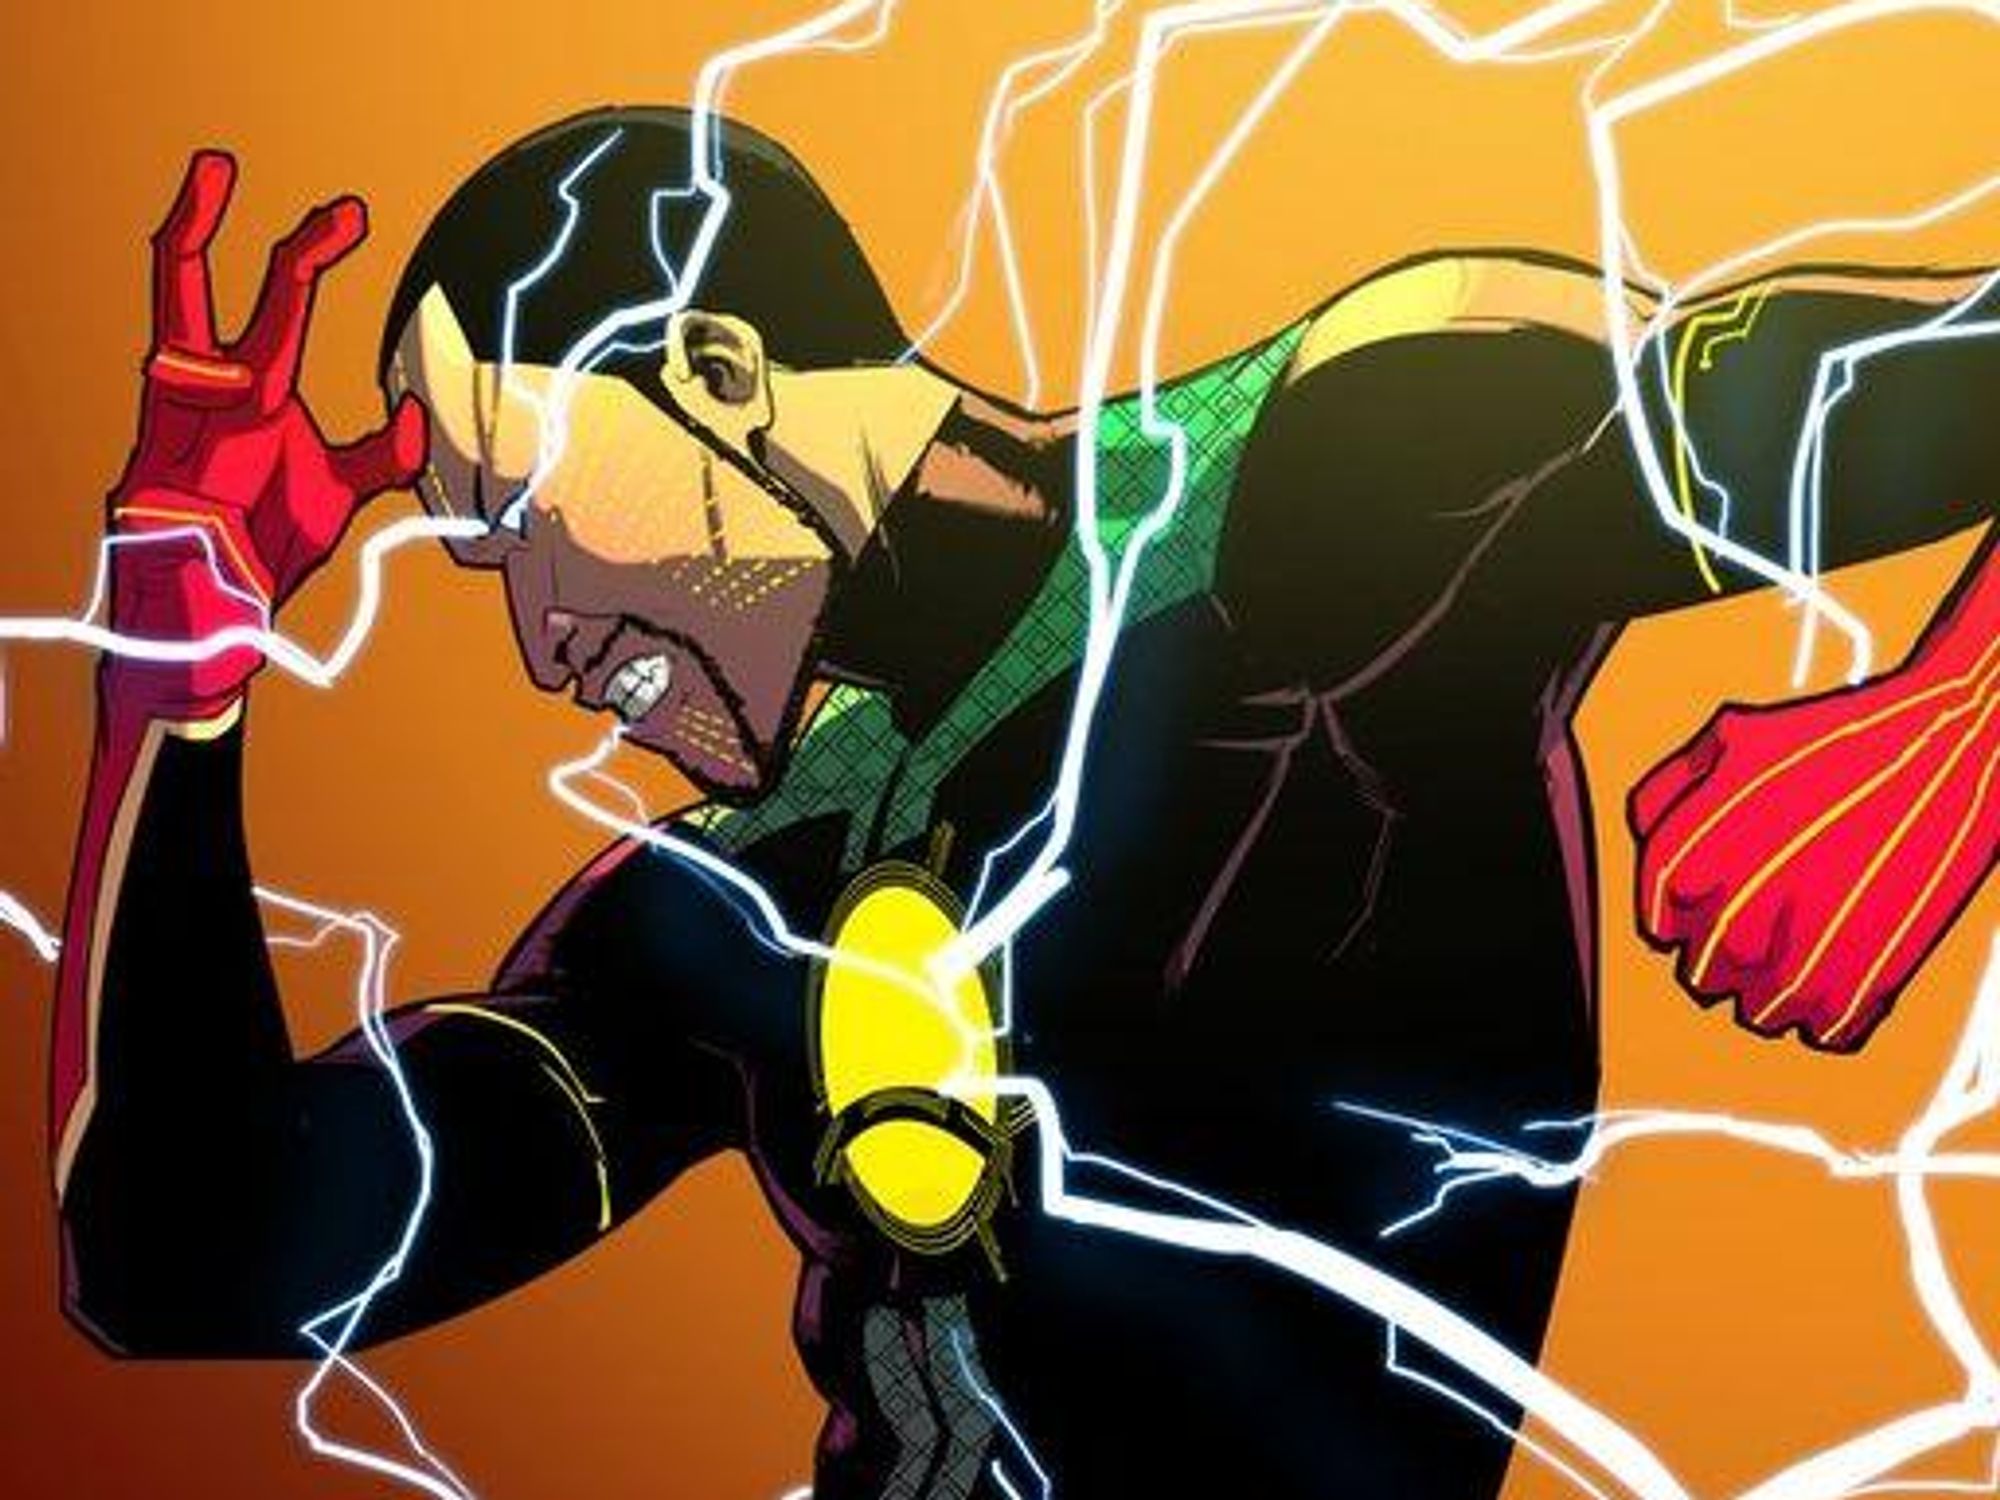 An image from the comic book series, Jember, created by Etan of a superhero with some lightning bolt rays emanating from him 